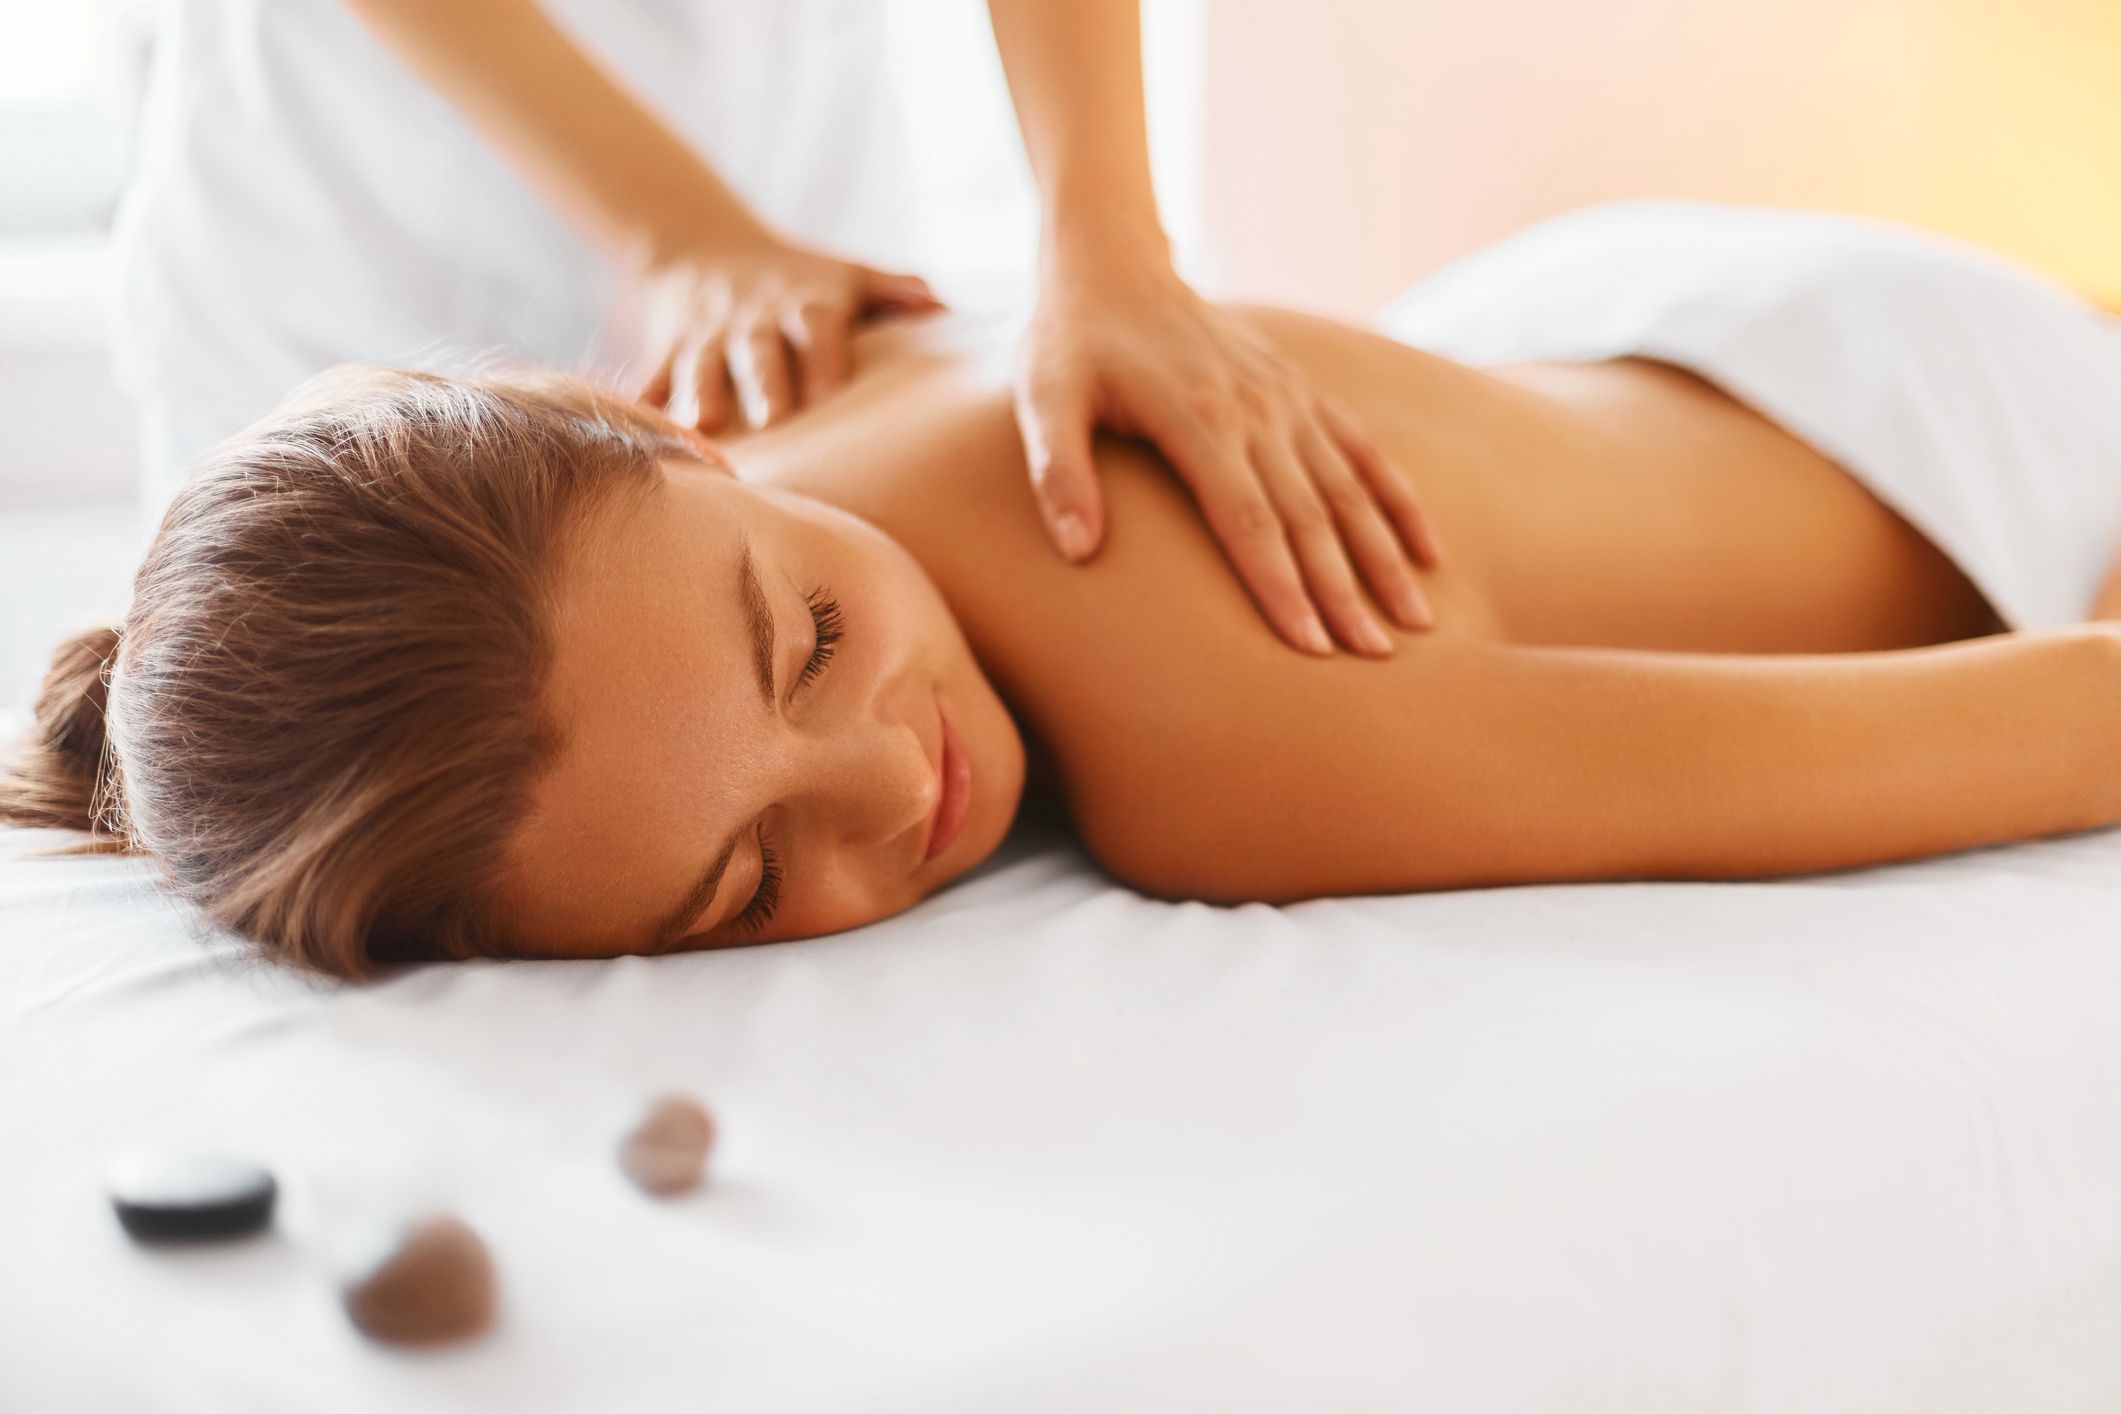 Full Body Sensual Massage for Women: What Women Need to Know